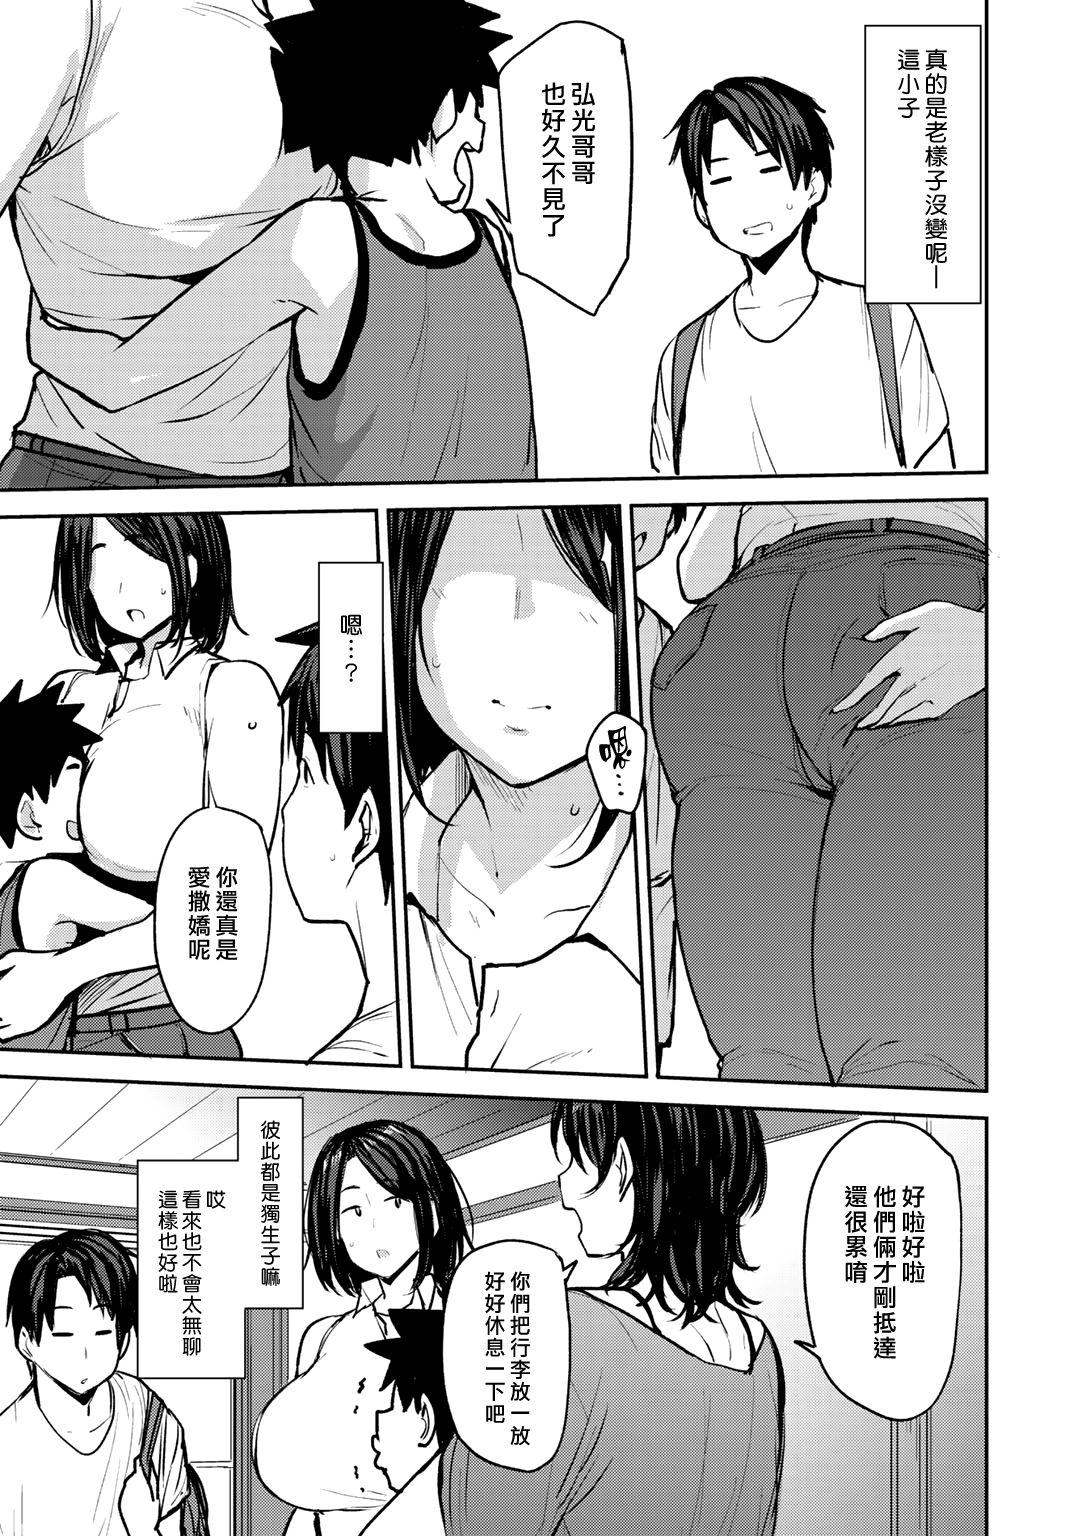 Soubo Soukan | Twin Mother Incest Ch. 1 2